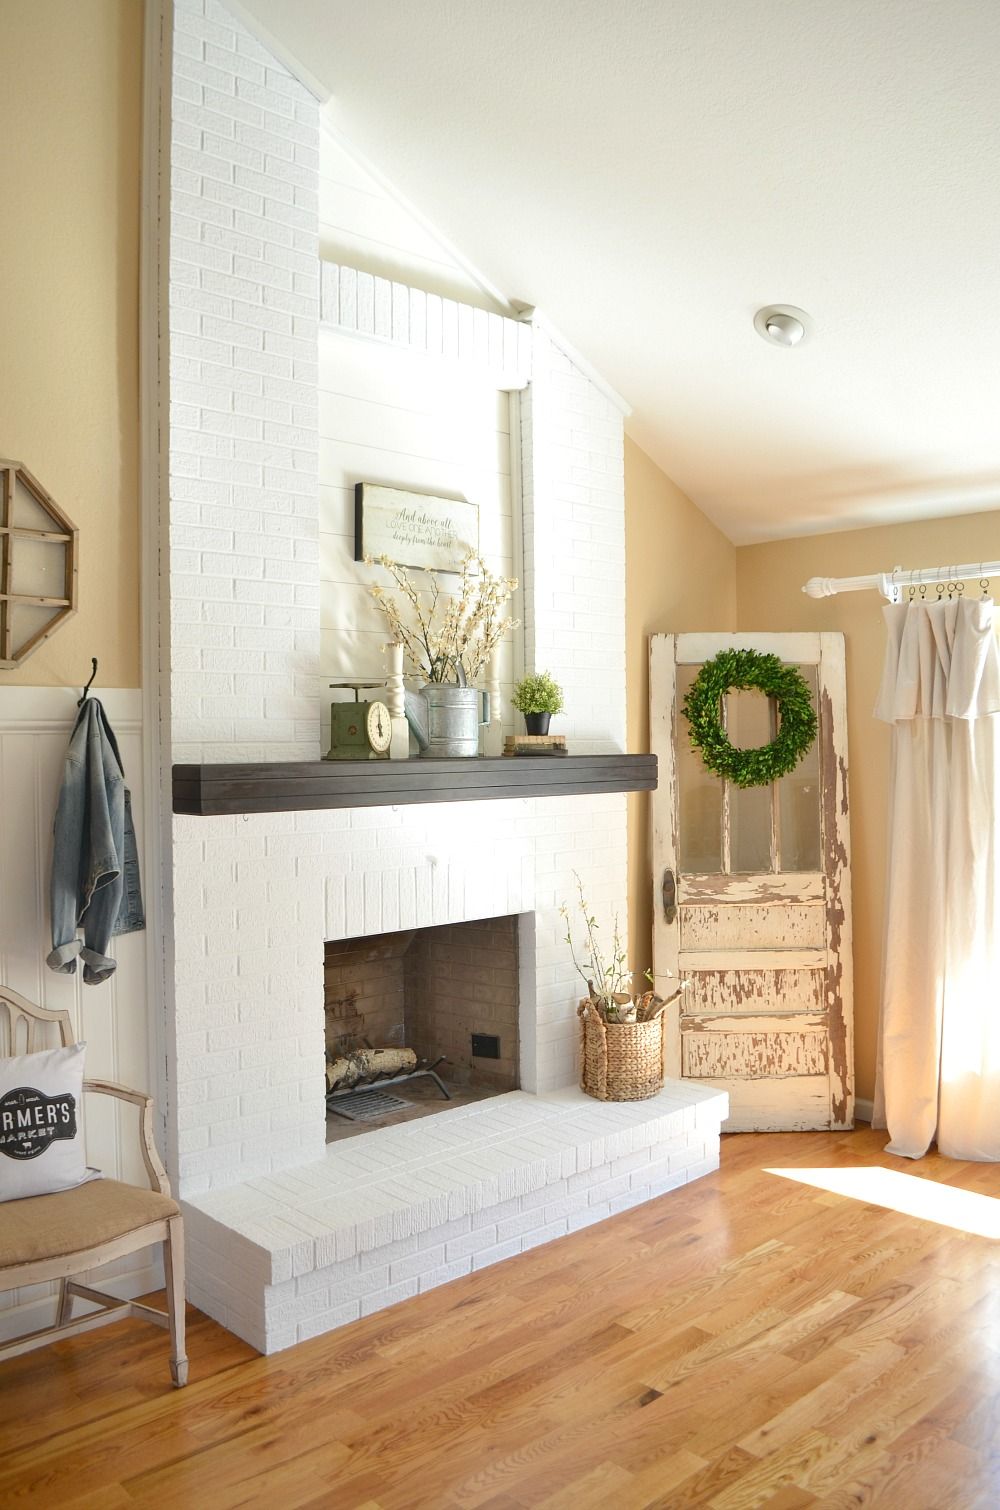 Cover Brick Fireplace with Wood Panels New How to Paint A Brick Fireplace Fireplaces